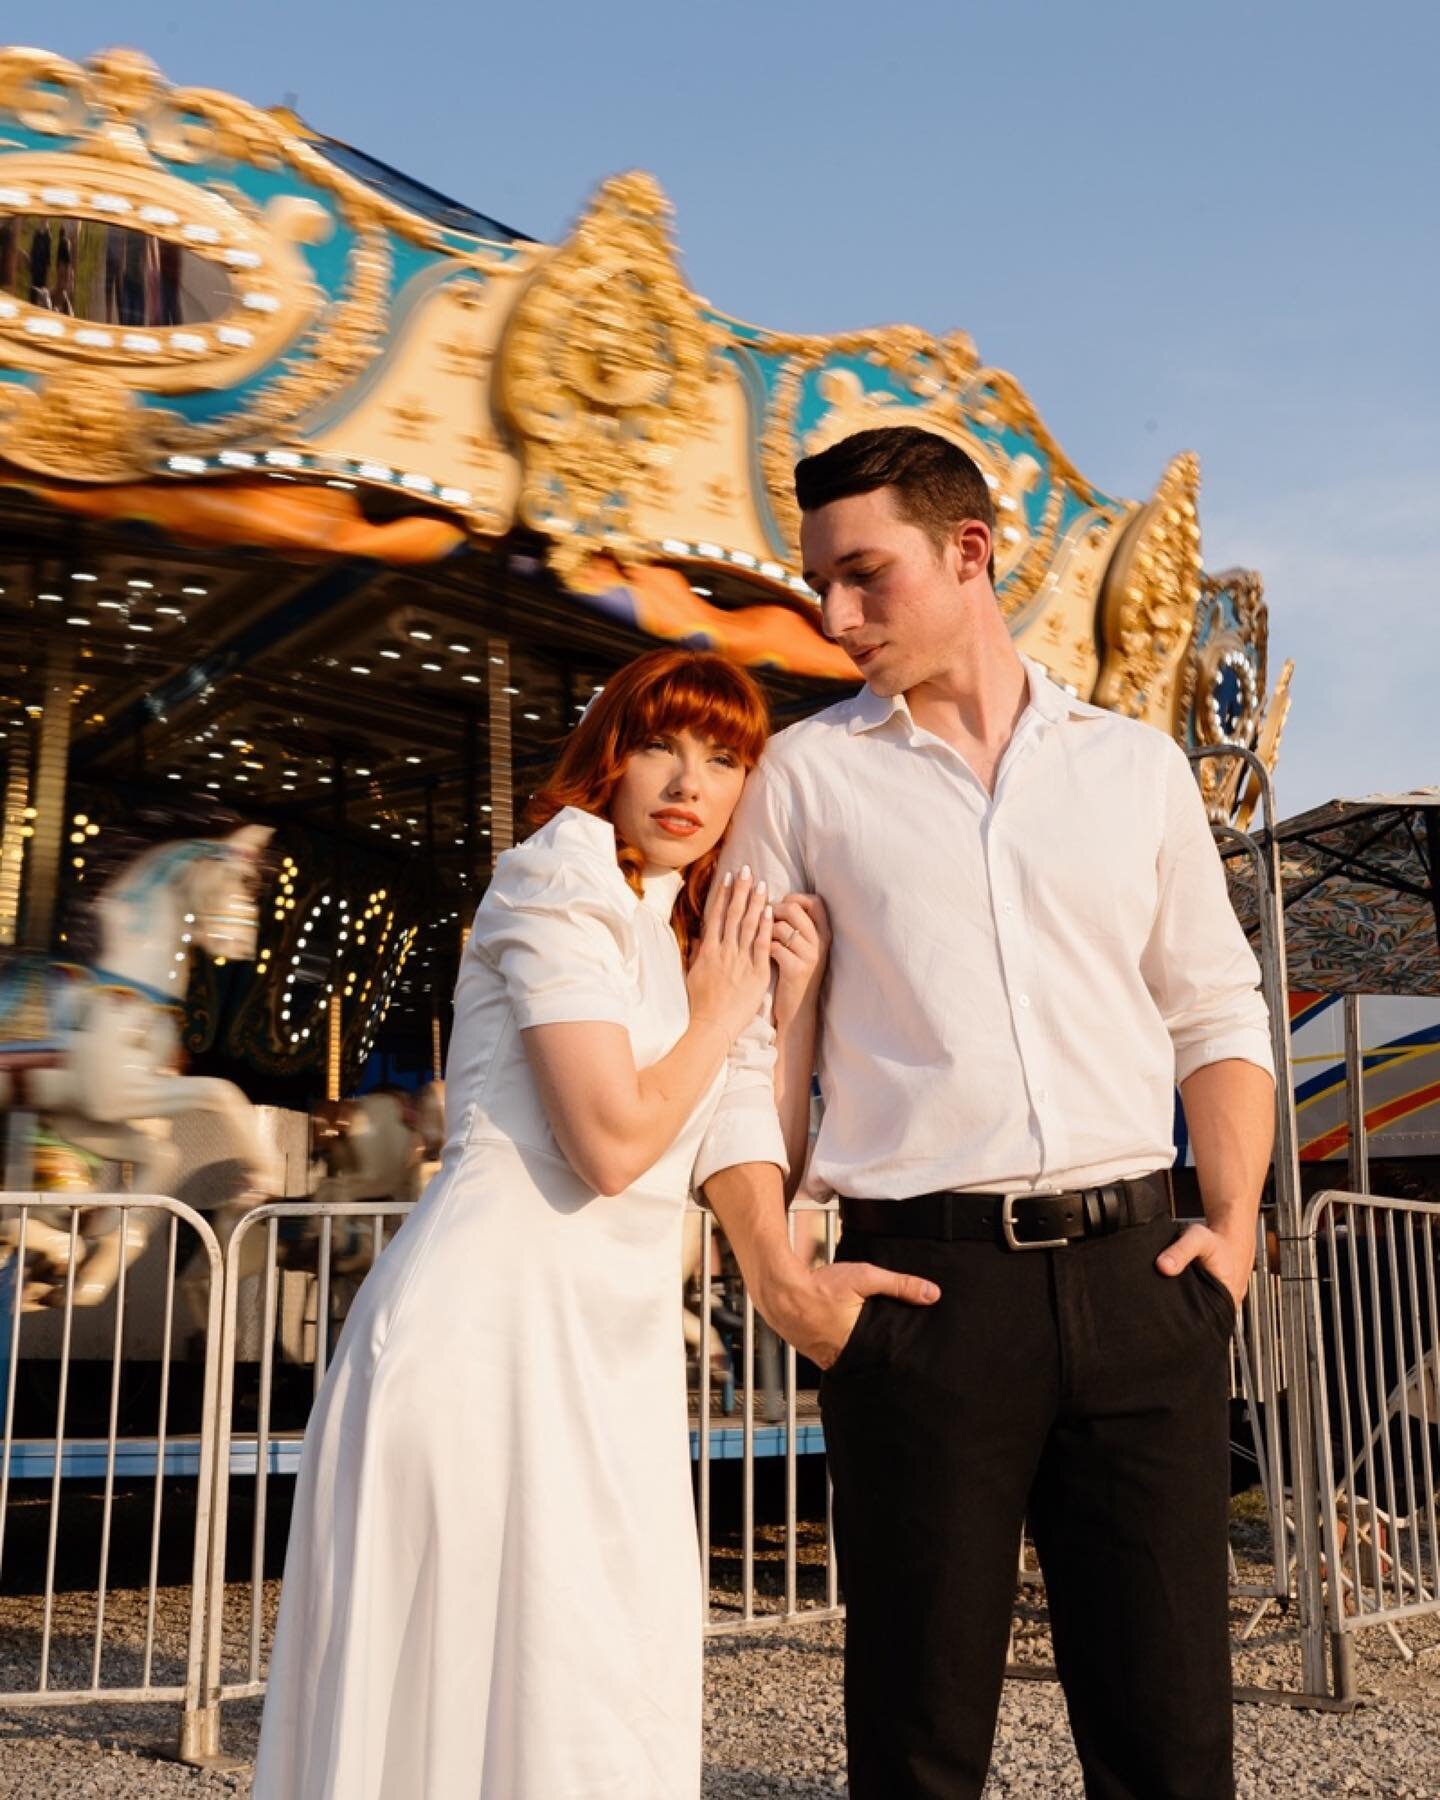 a carousel post for the carousel 🎠✨ 

 
#tnweddingphotographer #tnwedding #tnweddingphotography #tennesseeweddingphotographer #tnweddingphotographer #tnphotographer #nashvillephotographers #nashvilletnweddingphotographer #nashvilleweddingphotography